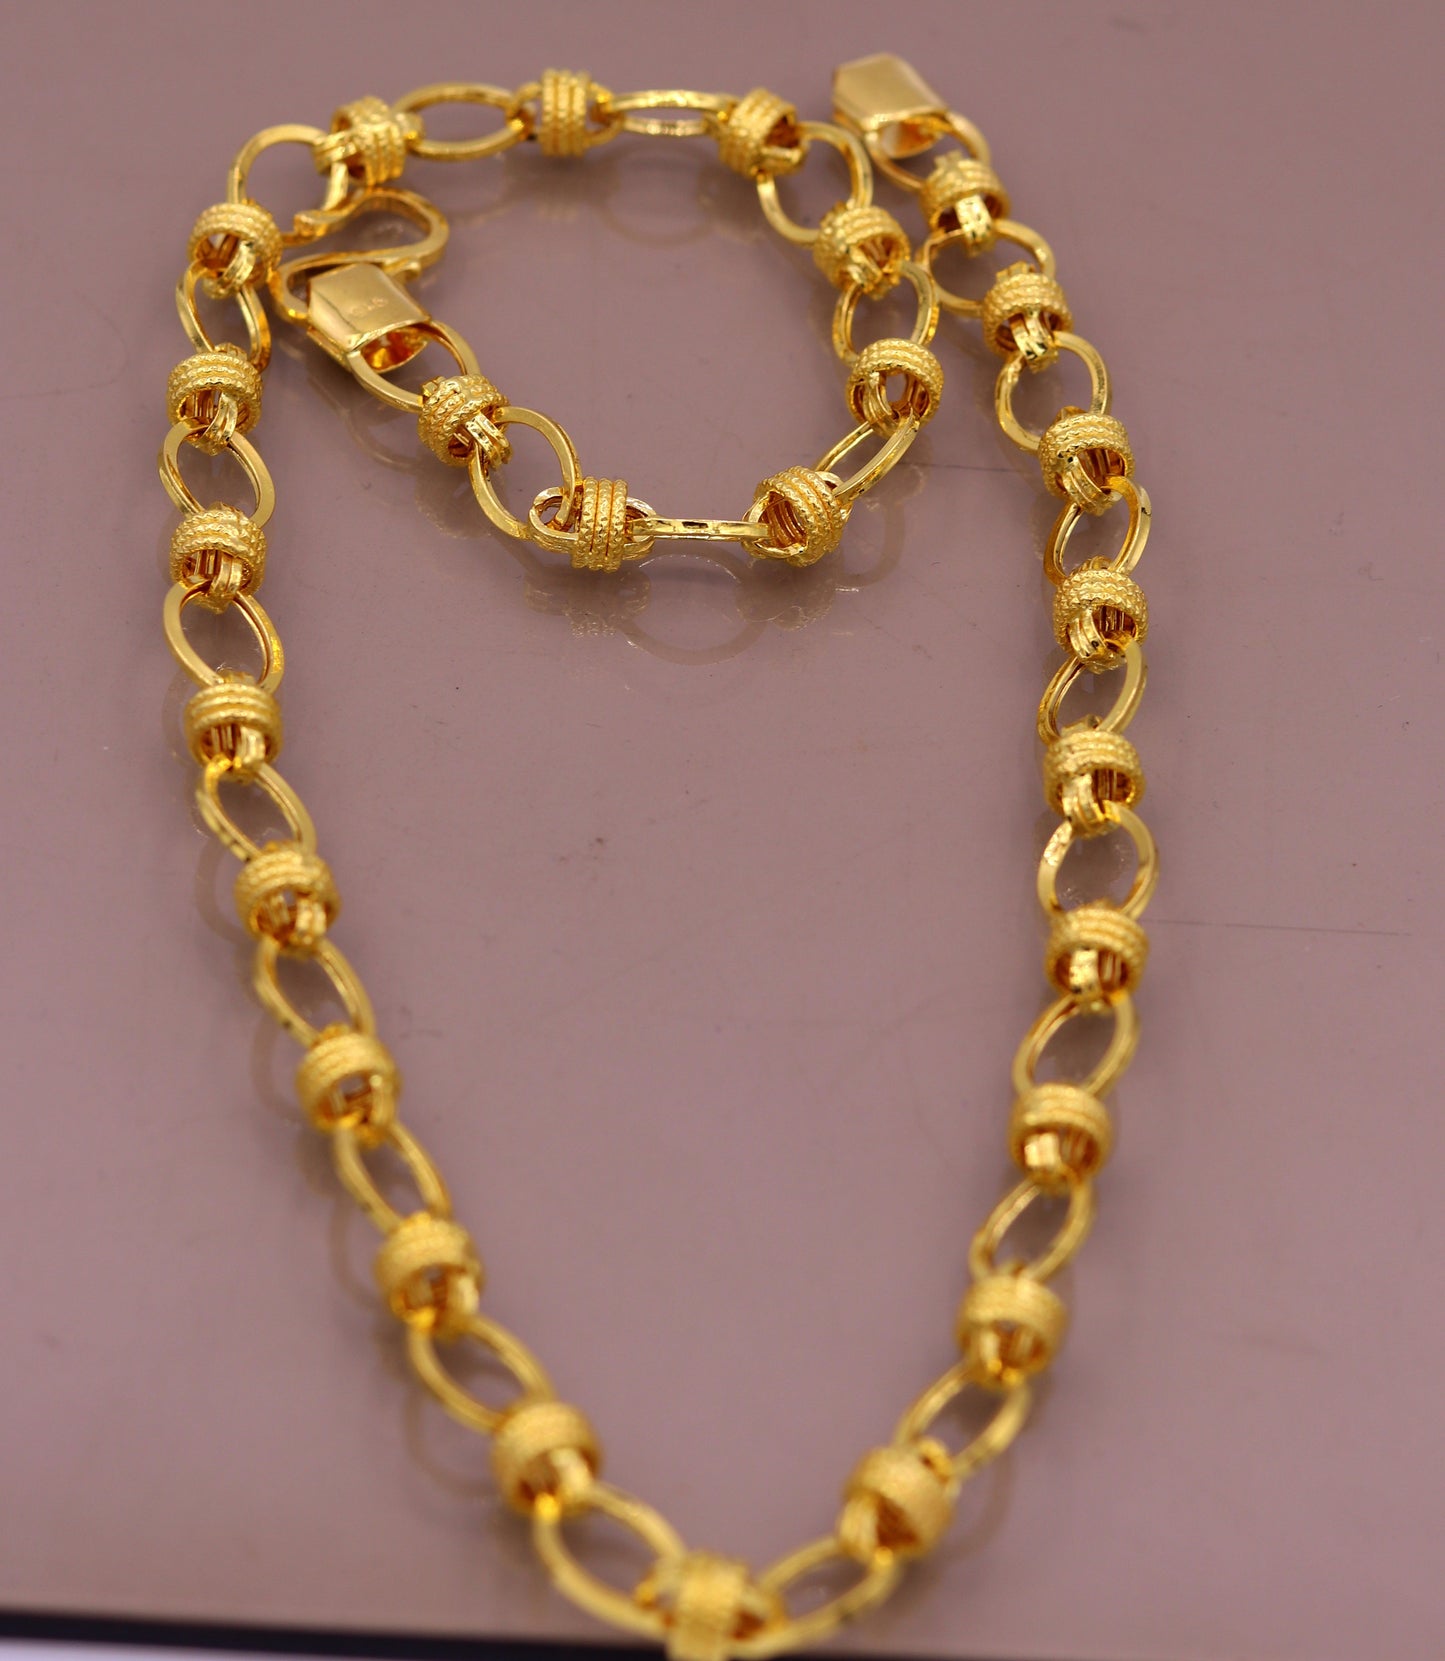 Vintage design handmade 22kt yellow gold amazing stylish 20 inches long chain necklace link chain from rajasthan india ch213 - TRIBAL ORNAMENTS